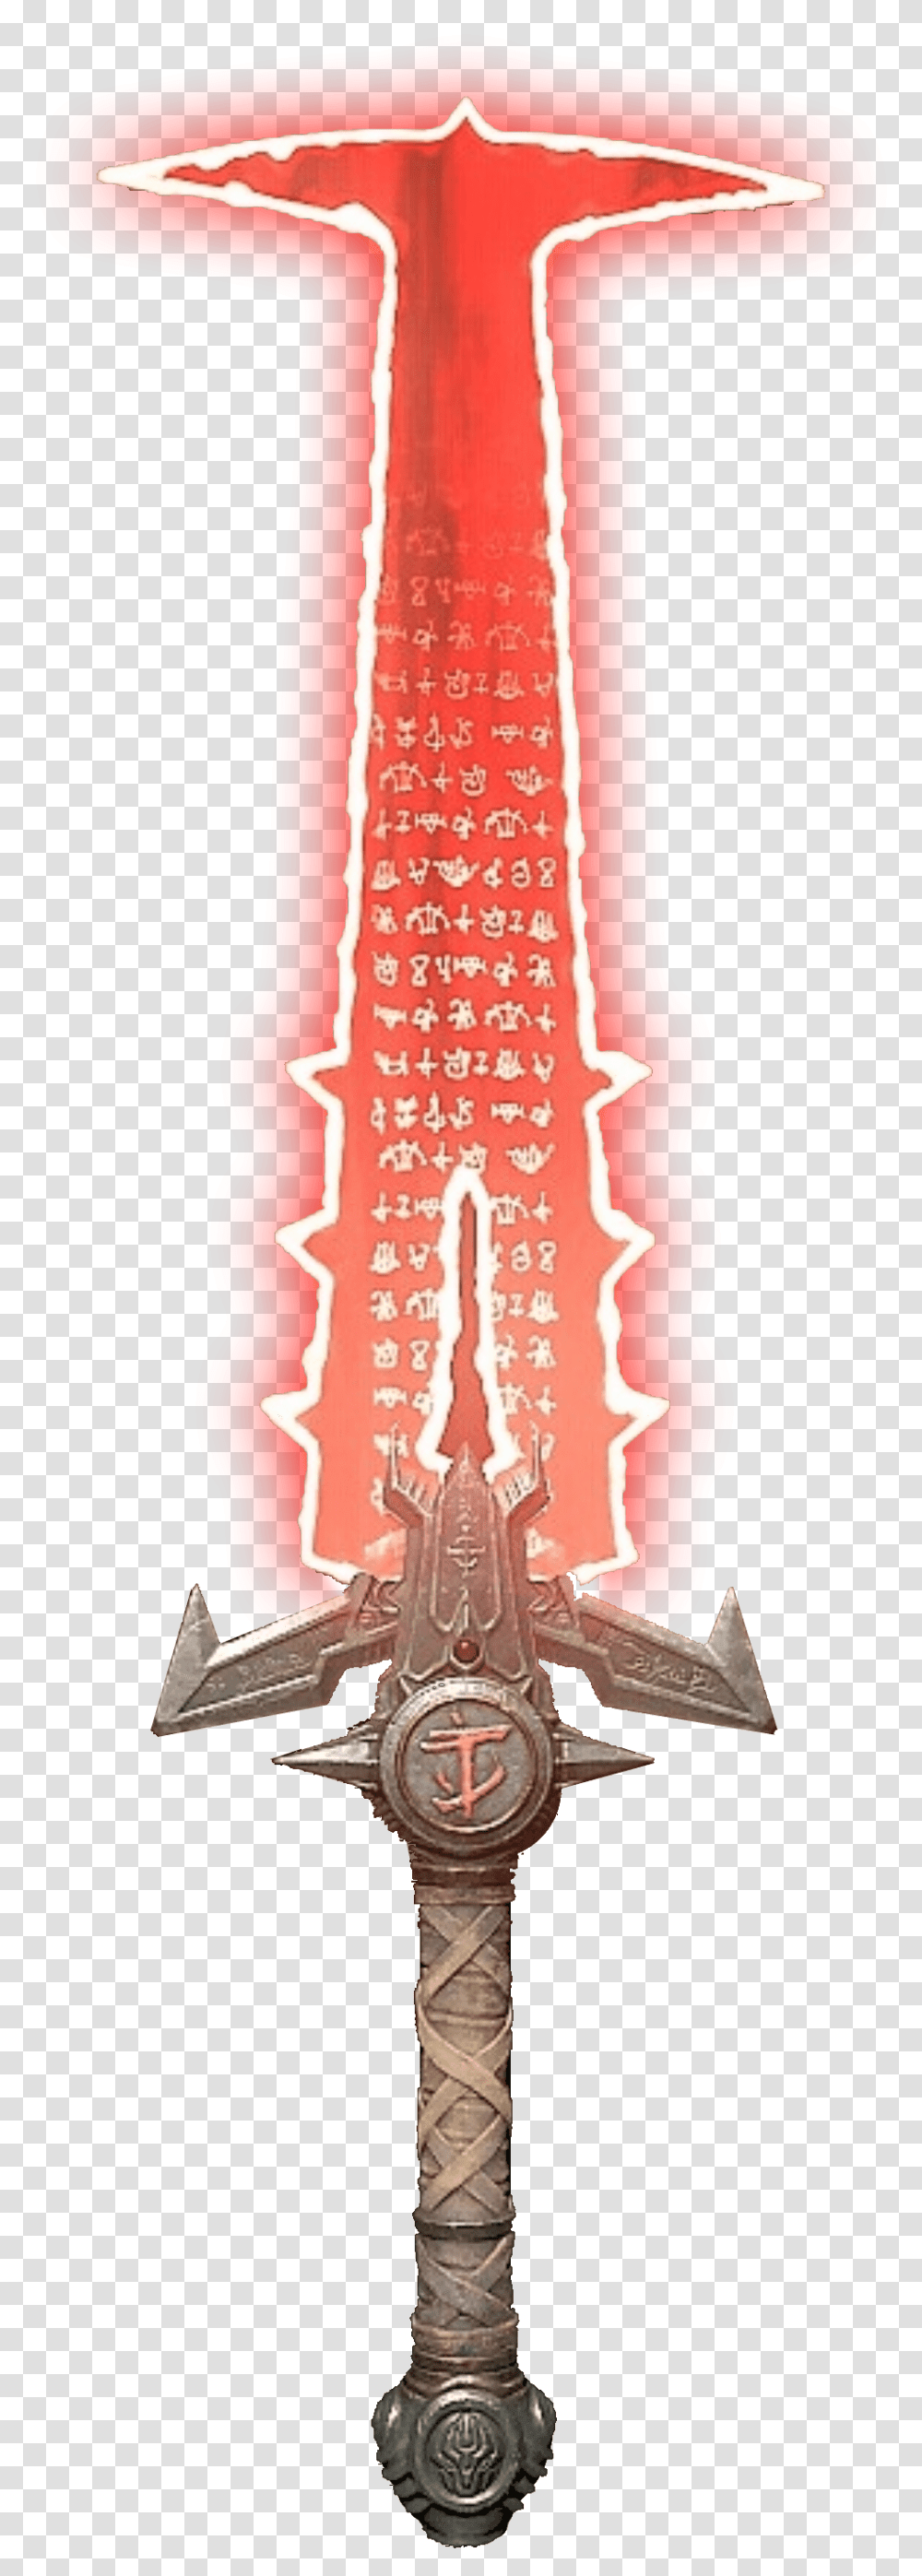 The Best 30 Doom Eternal Crucible Blade Collectible Sword, Cross, Symbol, Weapon, Weaponry Transparent Png